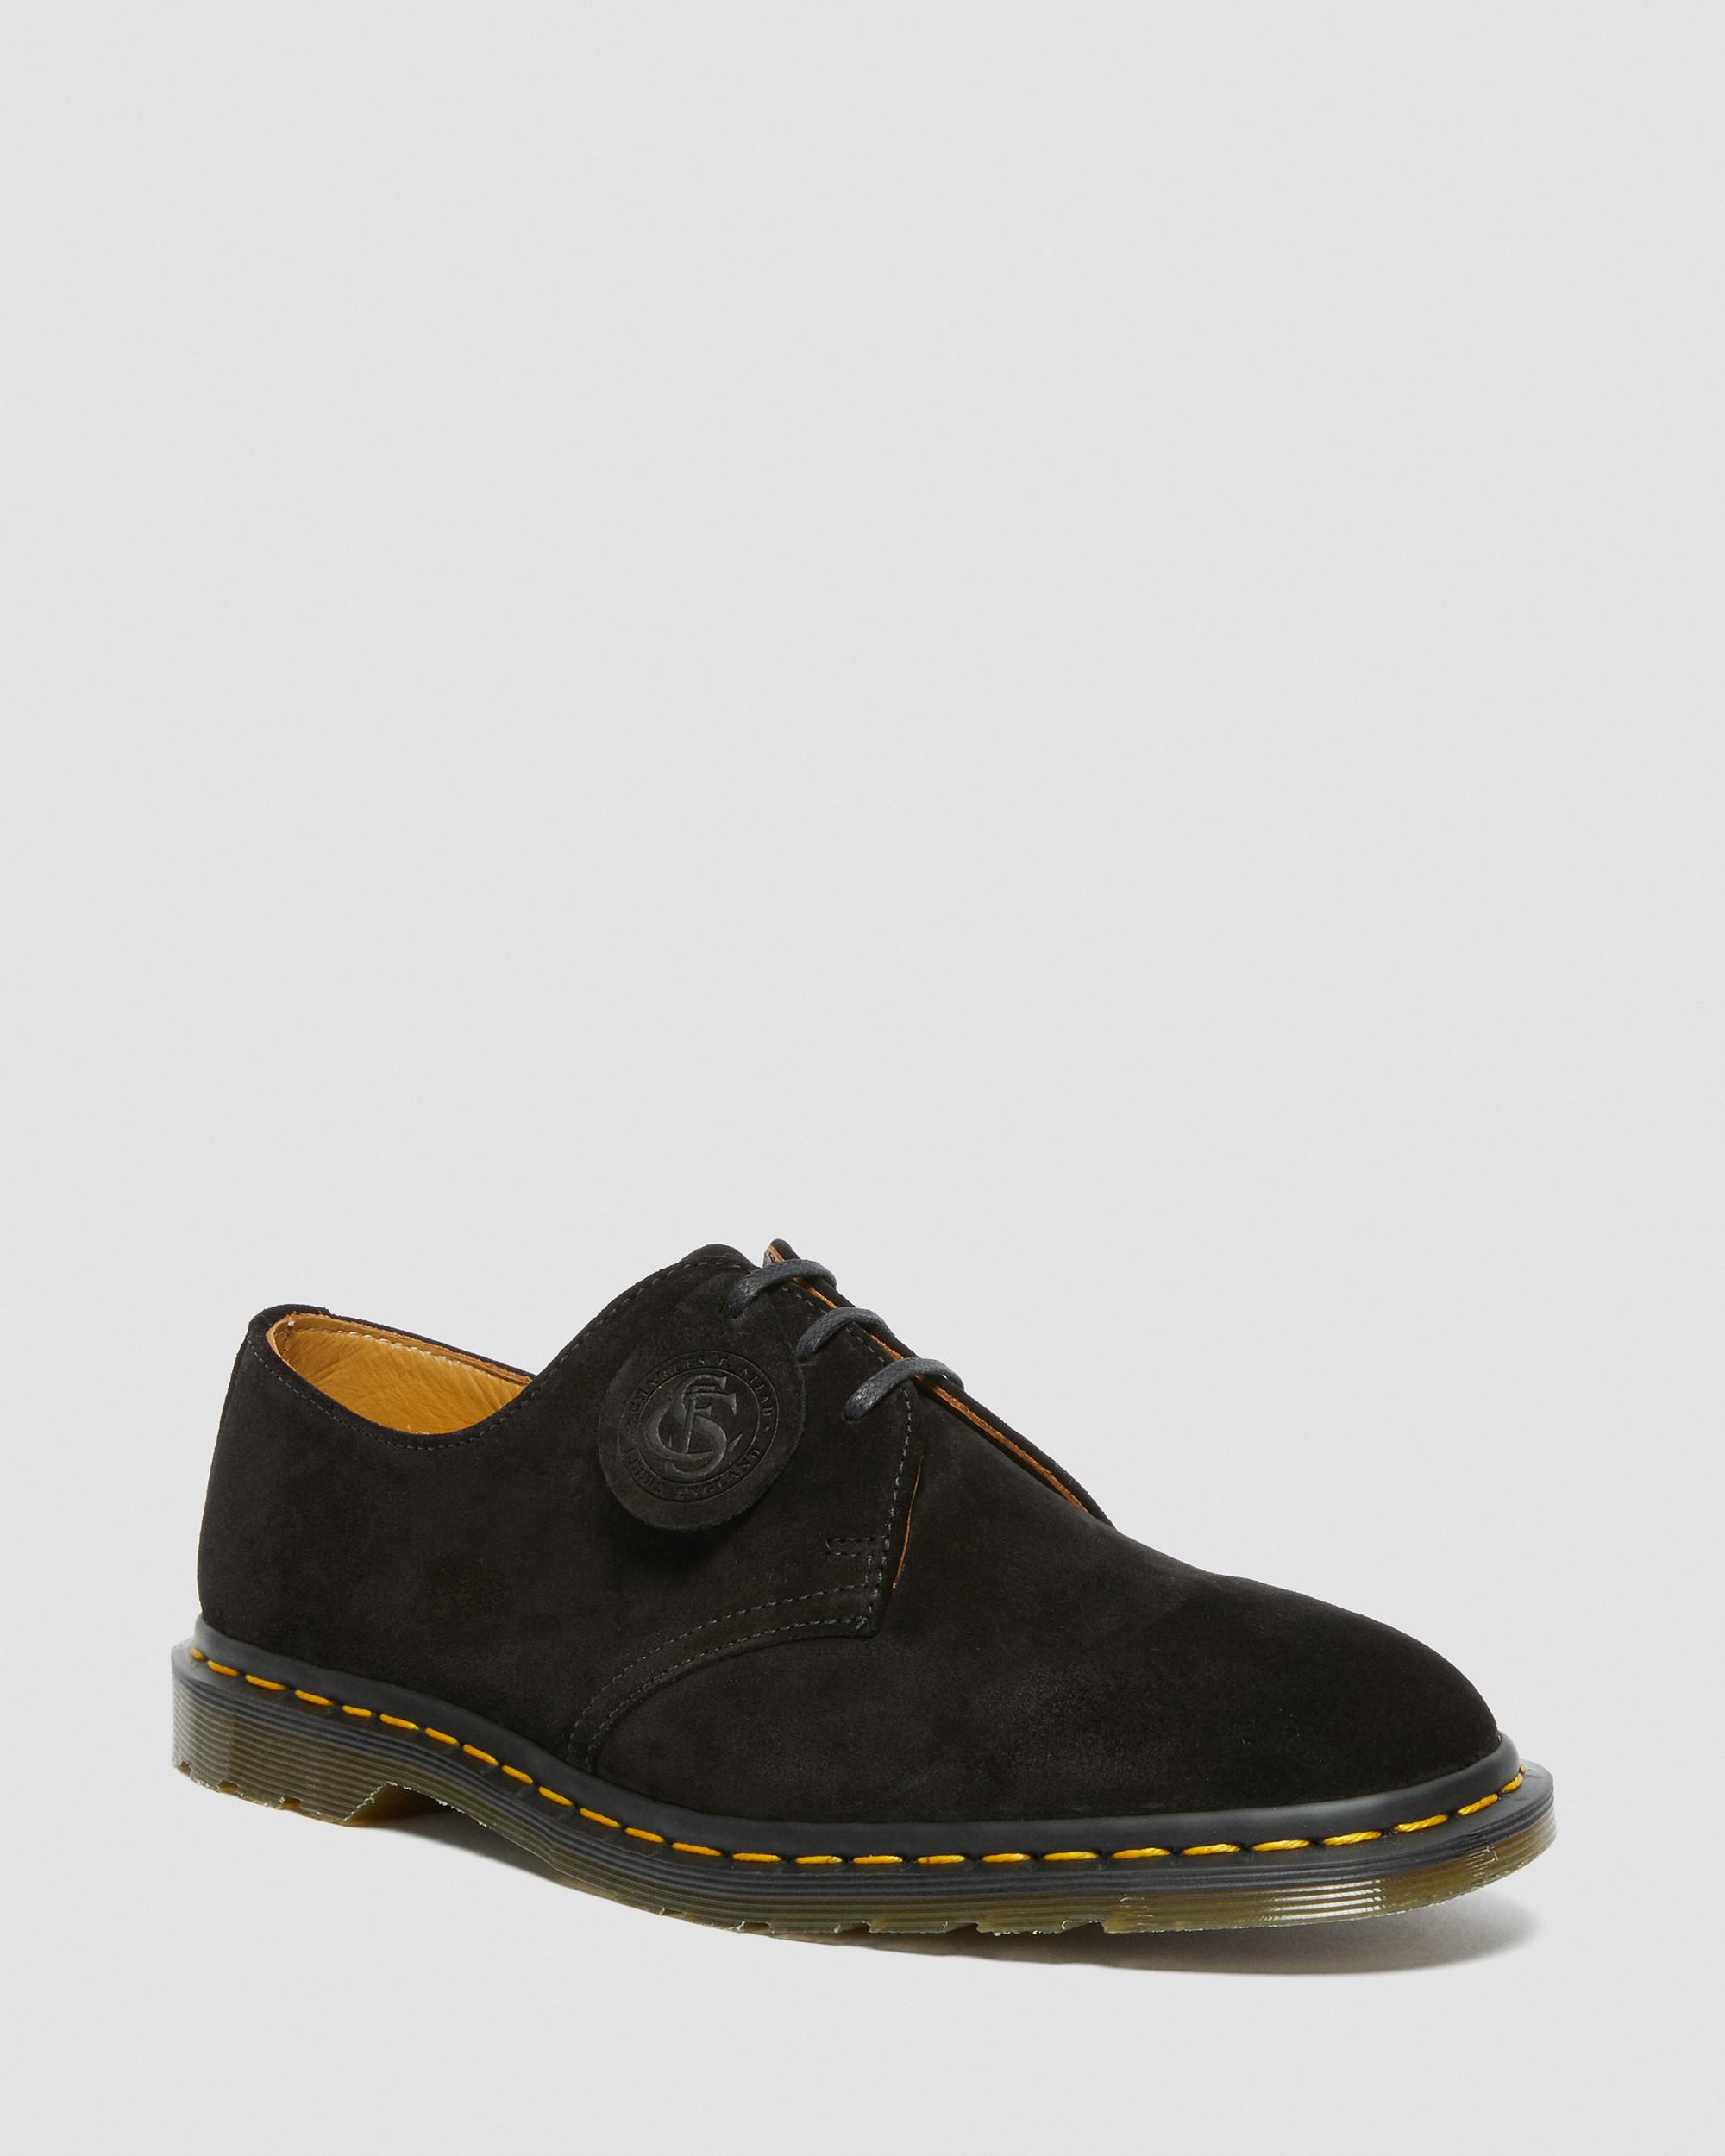 II Made England Suede Oxford Shoes | Dr. Martens